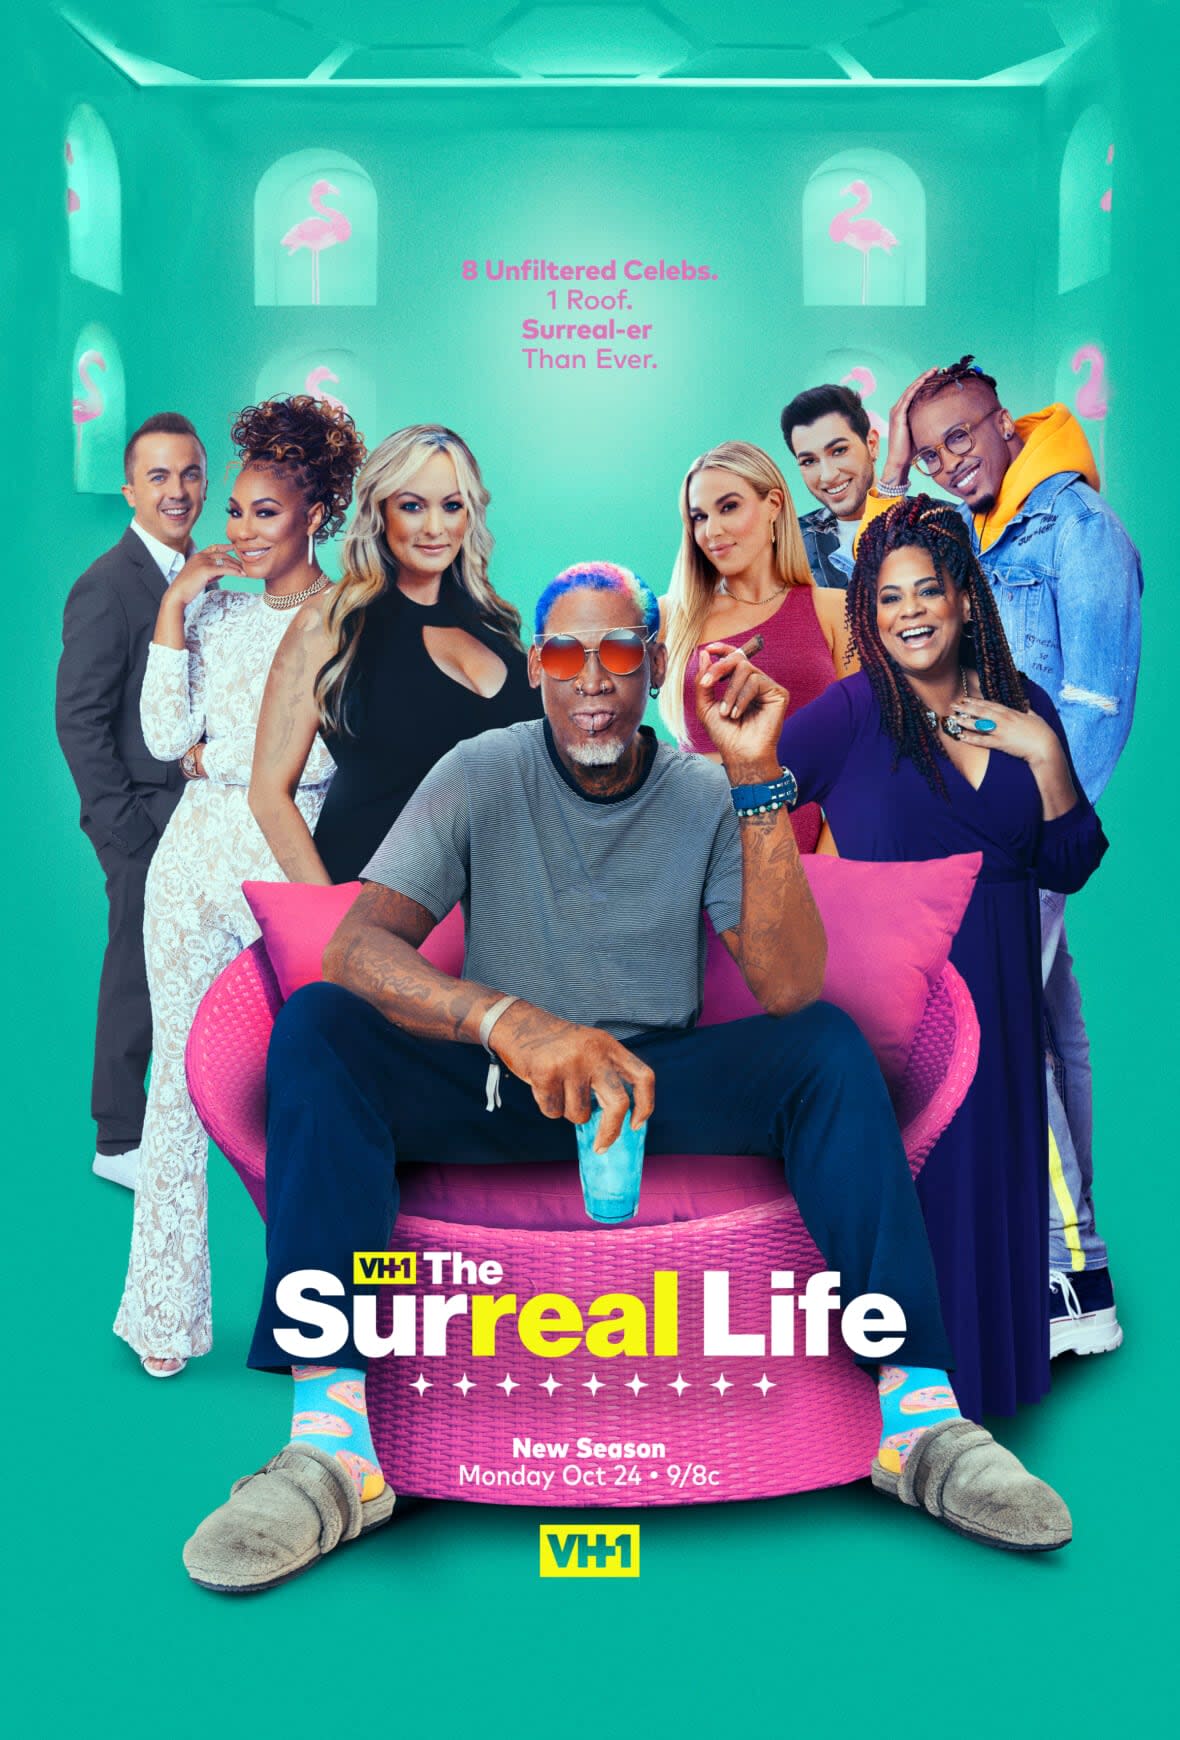 “The Surreal Life” Official Poster (Credit: VH1)